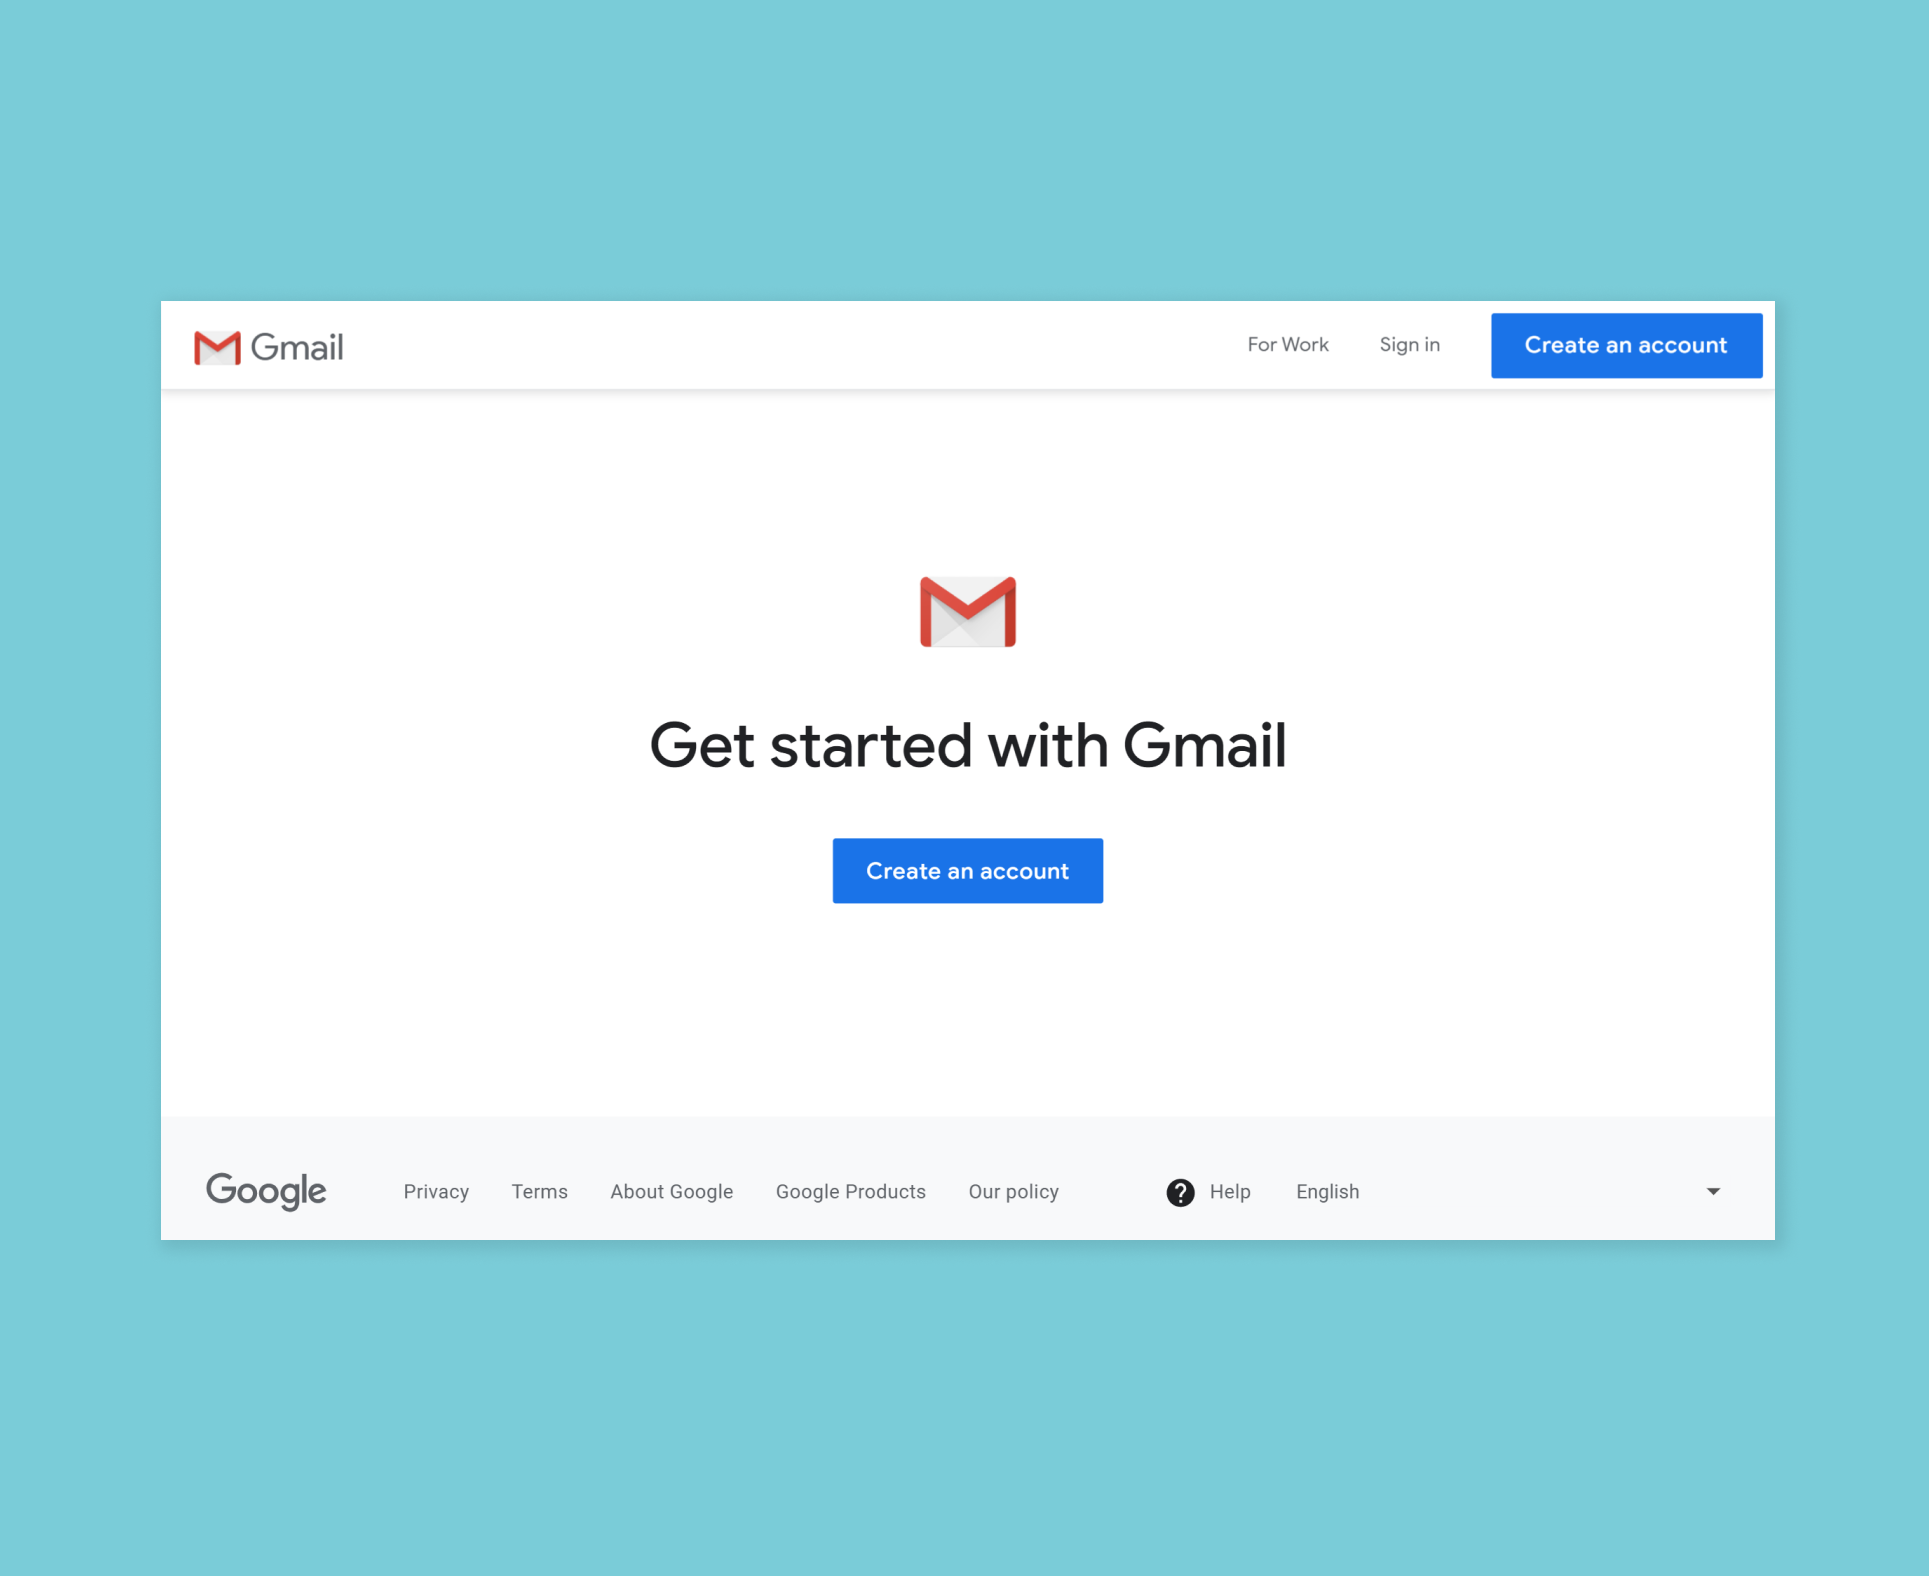 Gmail Pricing